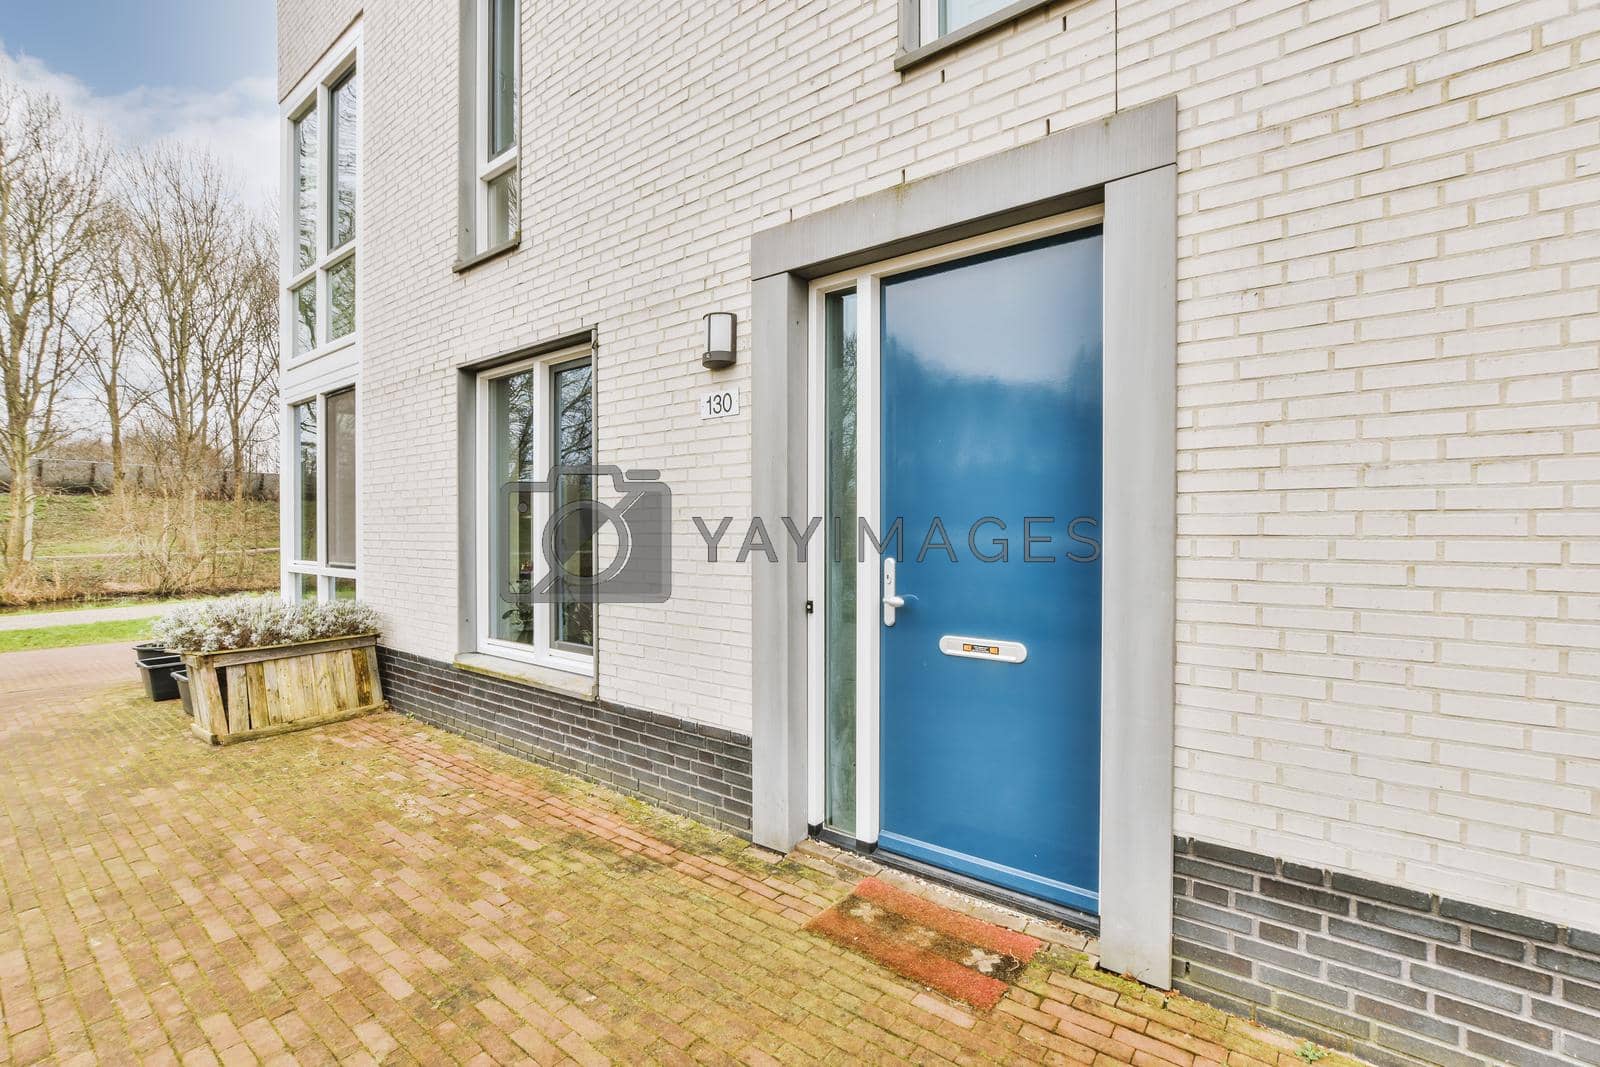 Royalty free image of The facade of a brick building with wooden door by casamedia